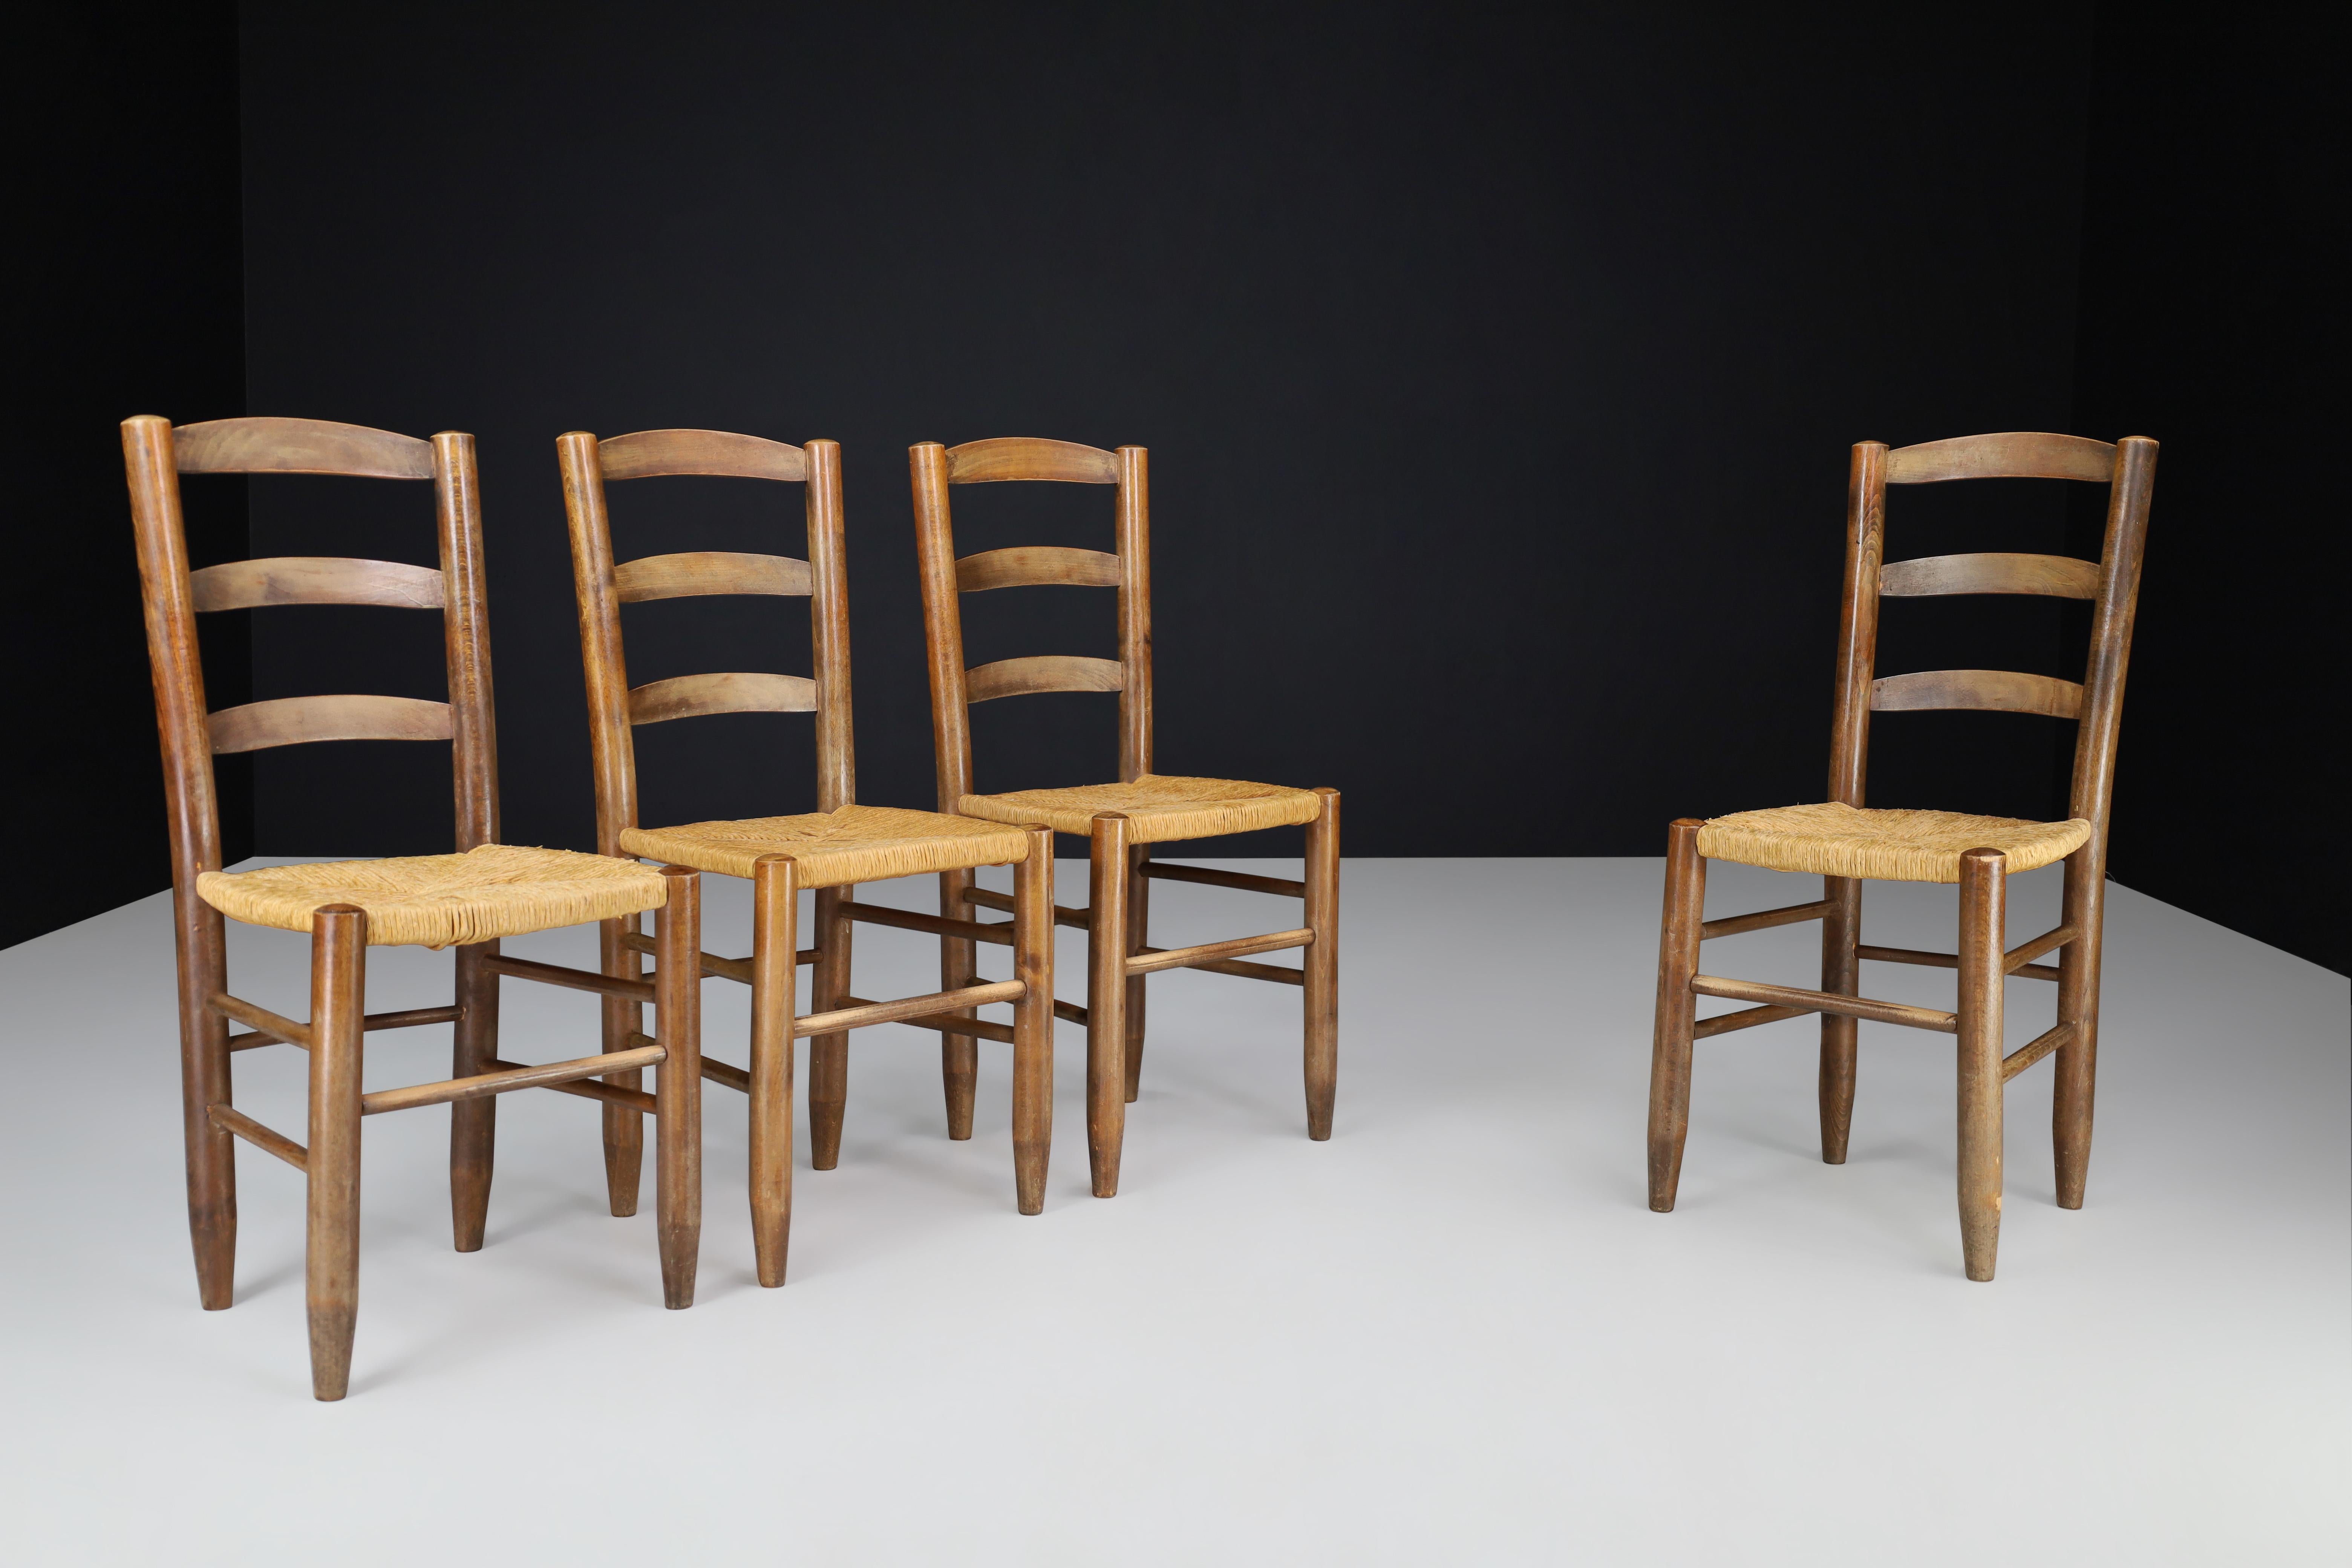 Charlotte Perriand Style Dining Chairs, France, 1950s.

These dining chairs in the style of Charlotte Perriand were made in France during the 1950s. They are crafted from solid beech and rush and possess a beautiful natural patina while being in